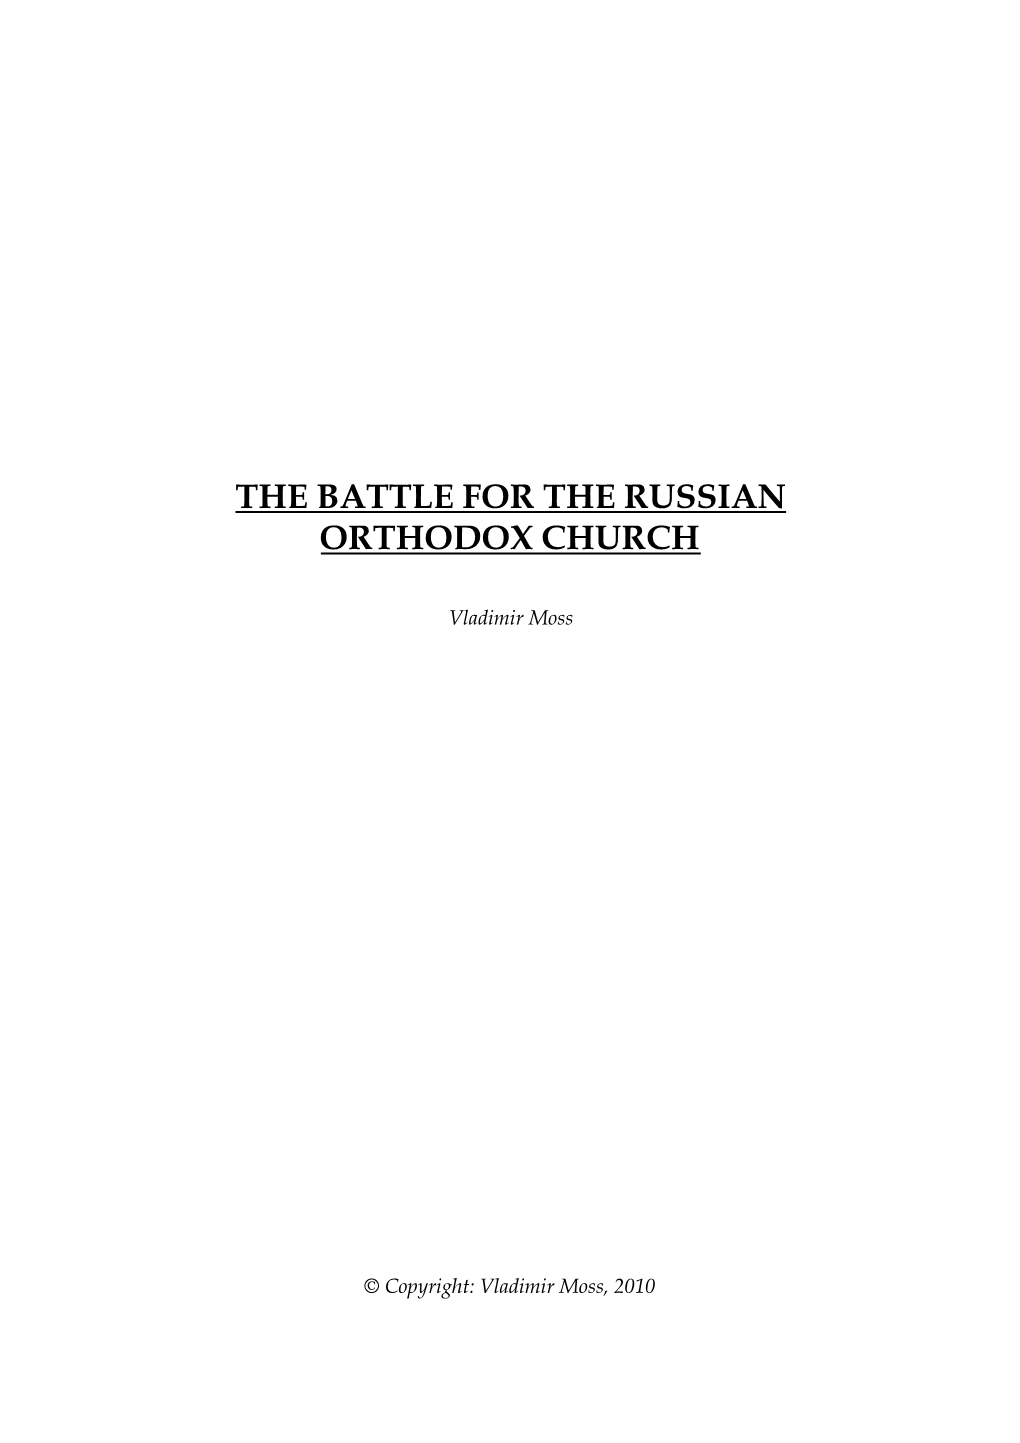 The Battle for the Russian Orthodox Church